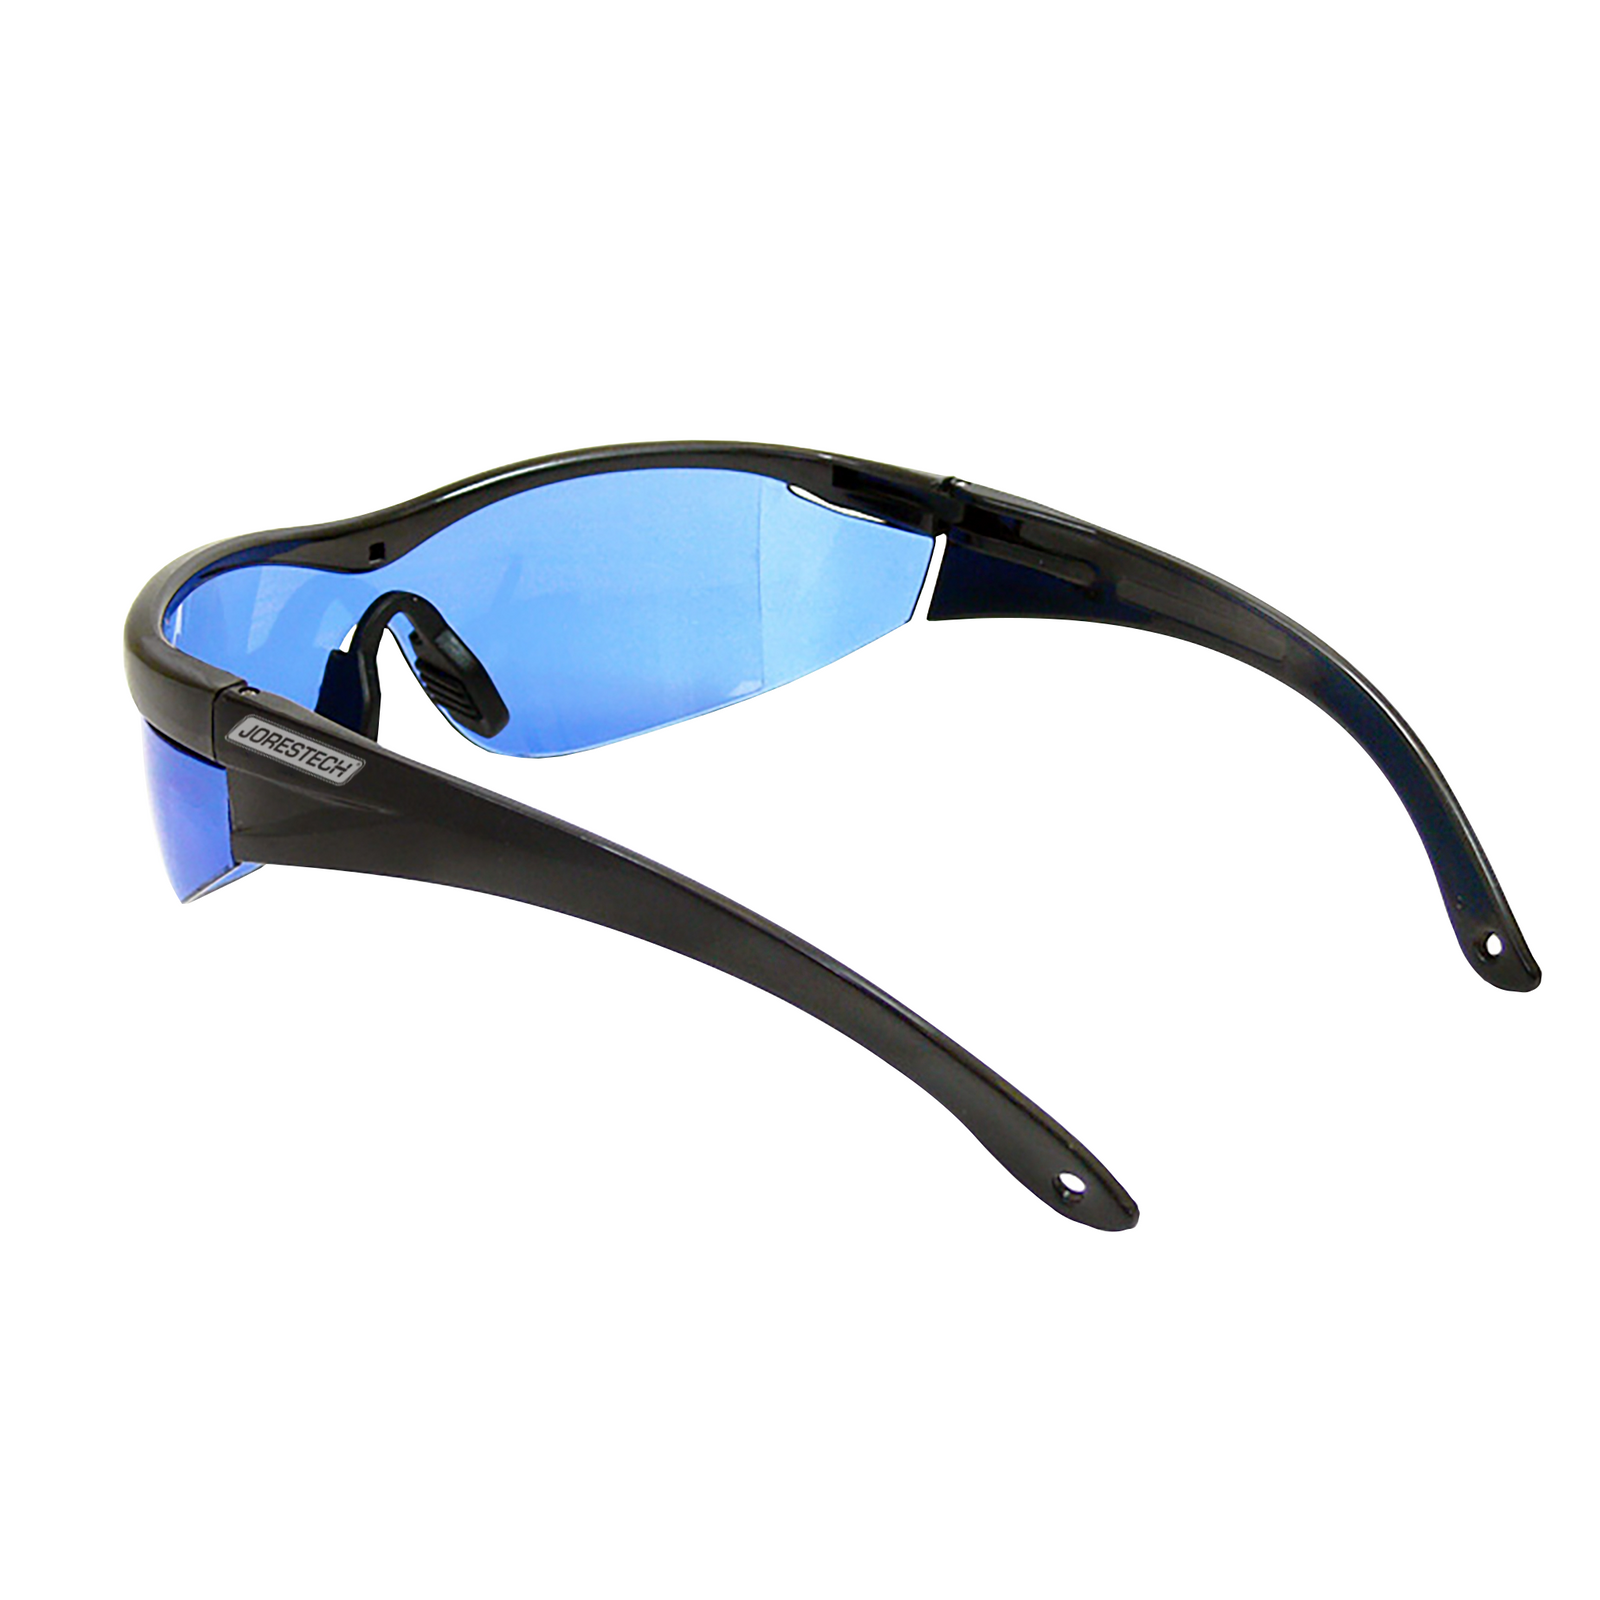 Side view of a black framed JORESTECH safety blue glasses with side shields for high impact protection. Each temple has a small hole to place a lanyard to secure the safety glass